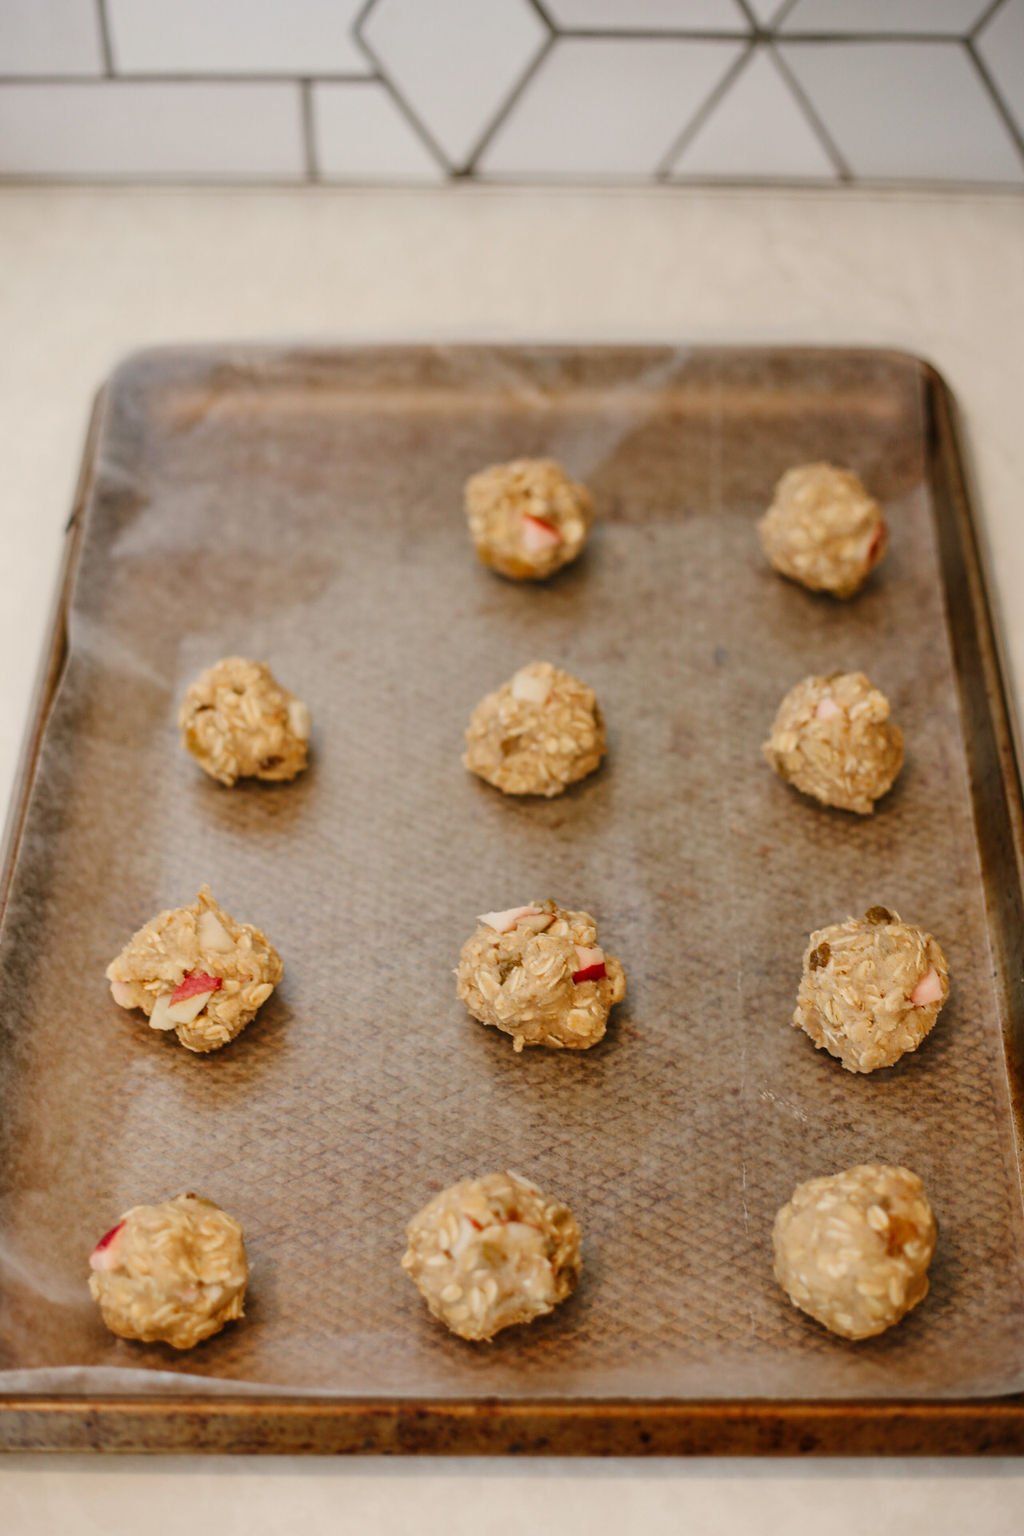 apple oatmeal cookies are ready to be baked